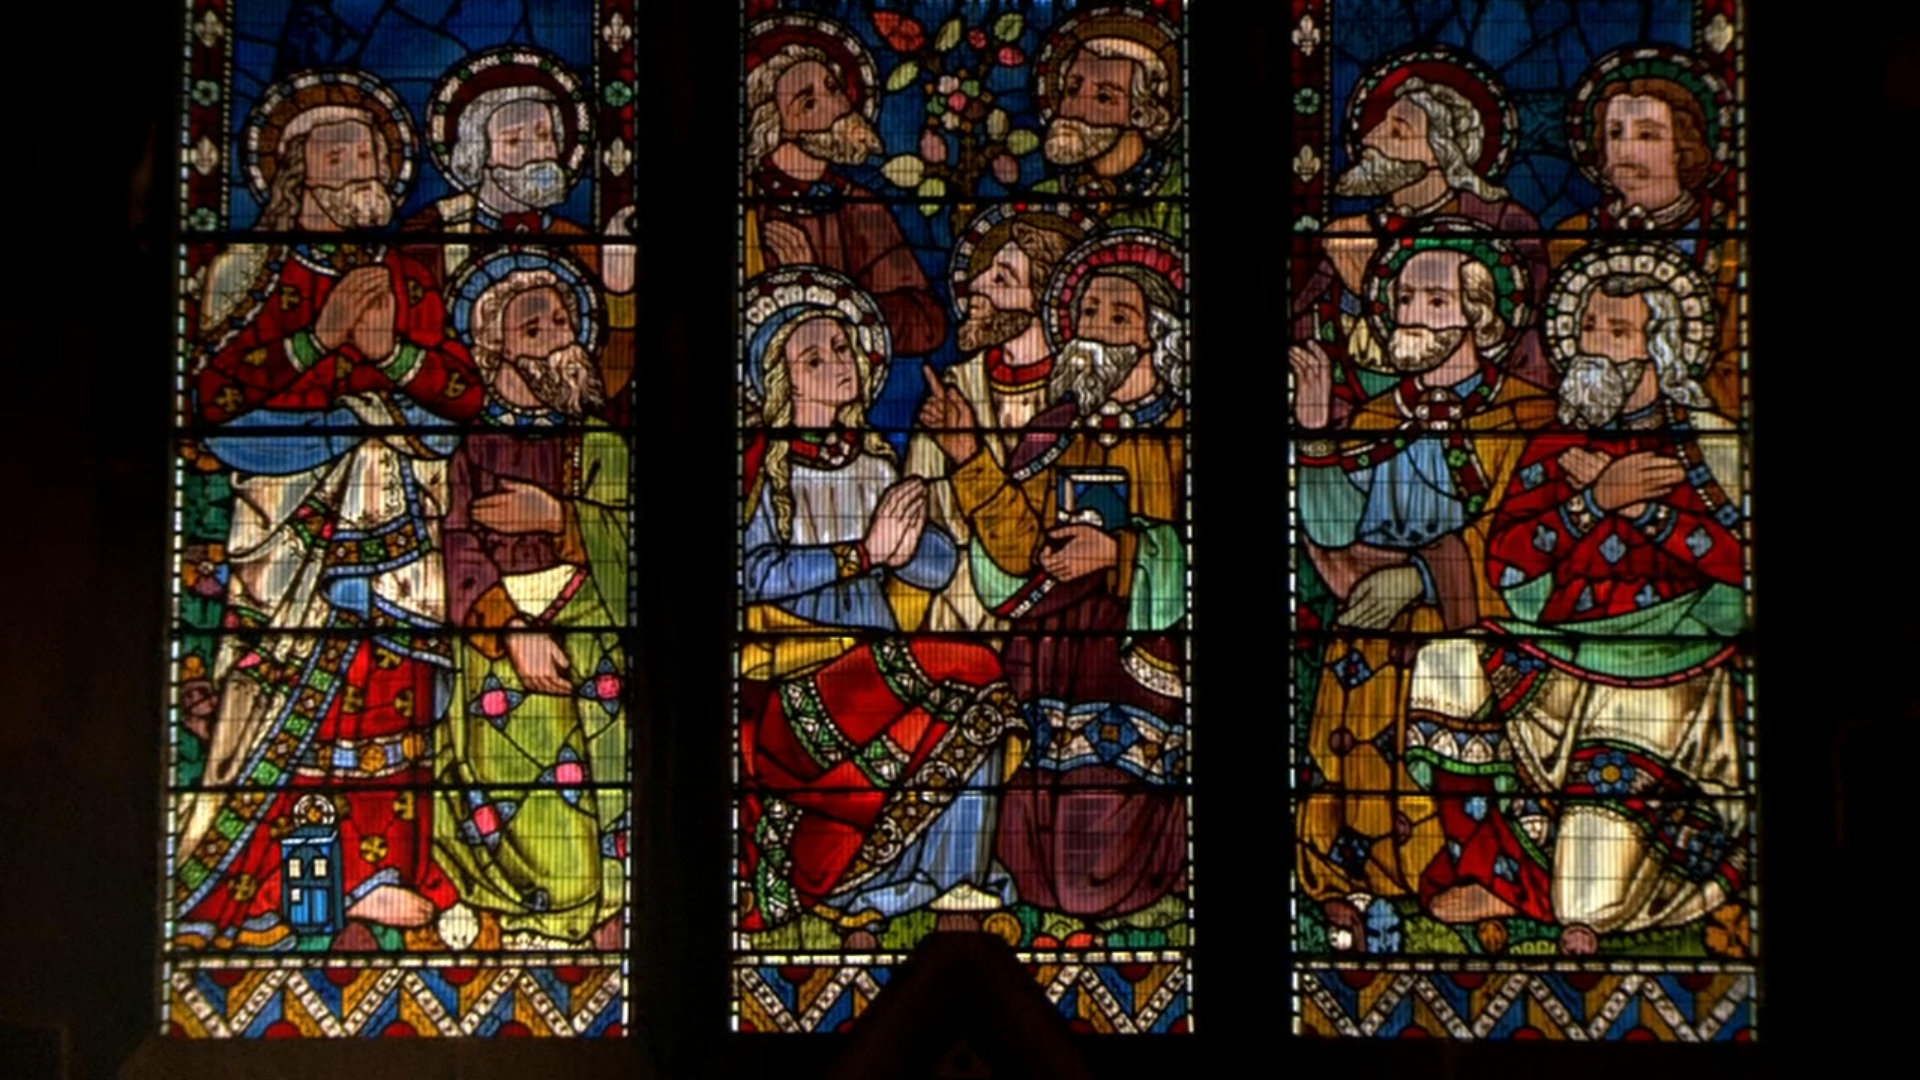 Download Stained Glass Wallpaper 1920x1080 | Wallpoper #365031